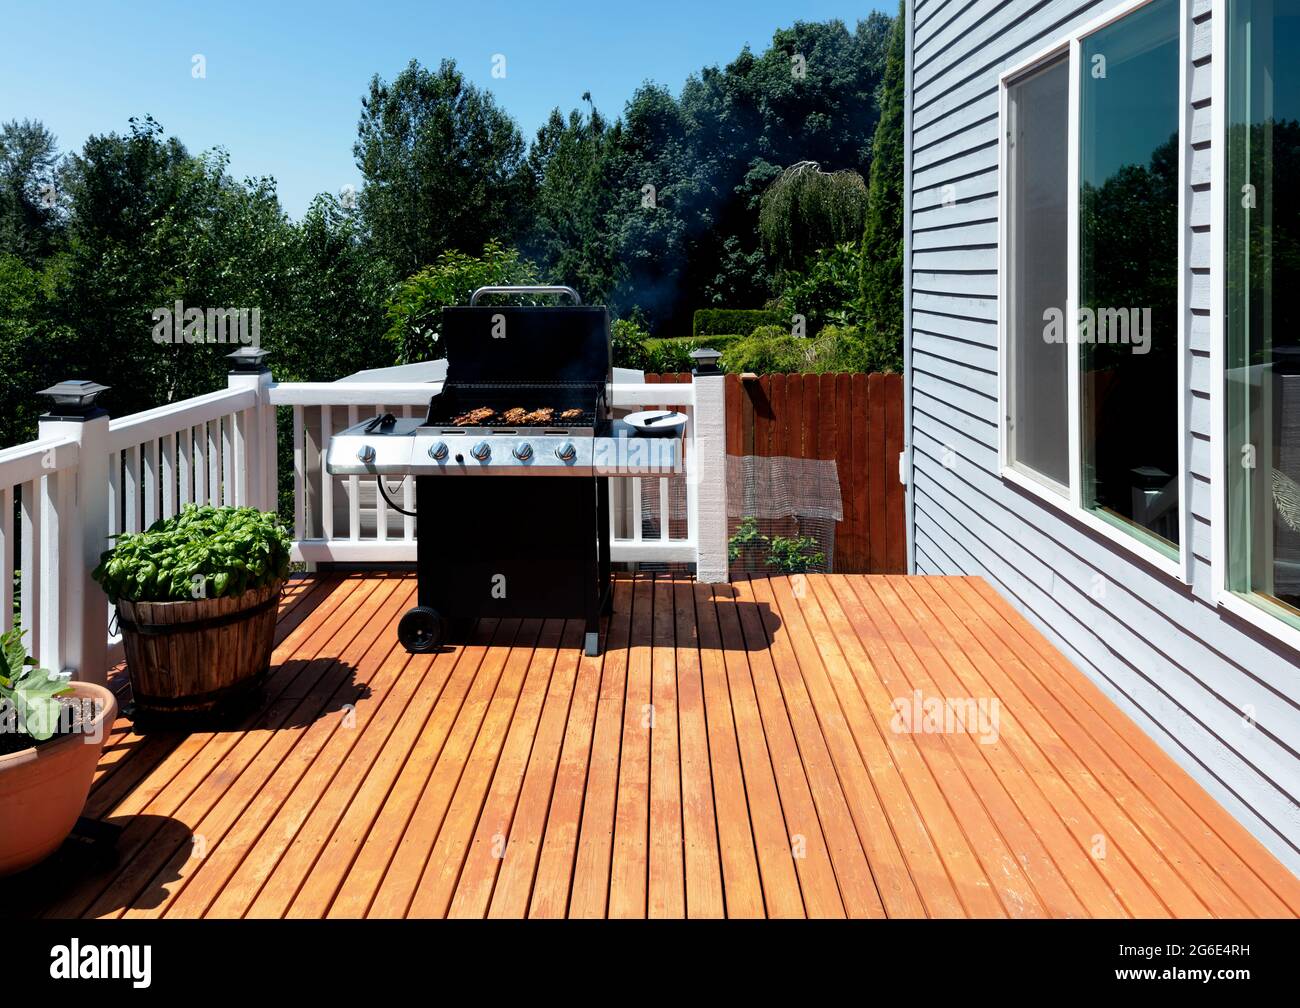 Outdoor BBQ cooker with lid open displaying smoke coming out while on home wooden deck during summertime Stock Photo